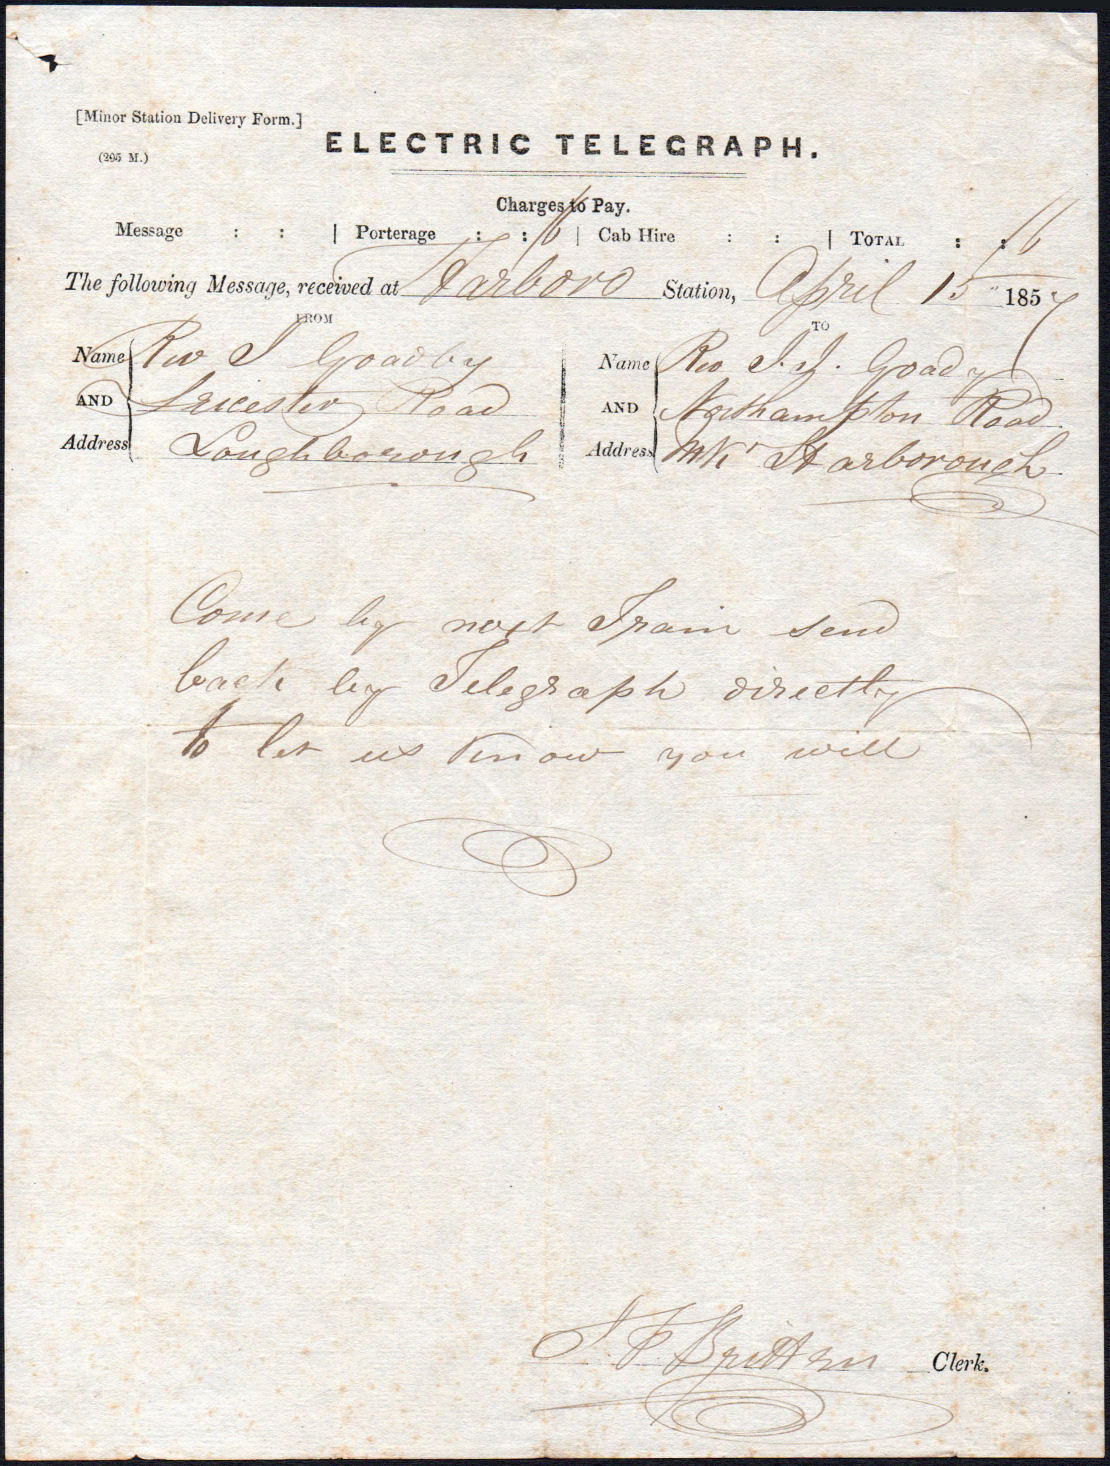 Electric Telegraph Co Minor Station delivery form 1857.